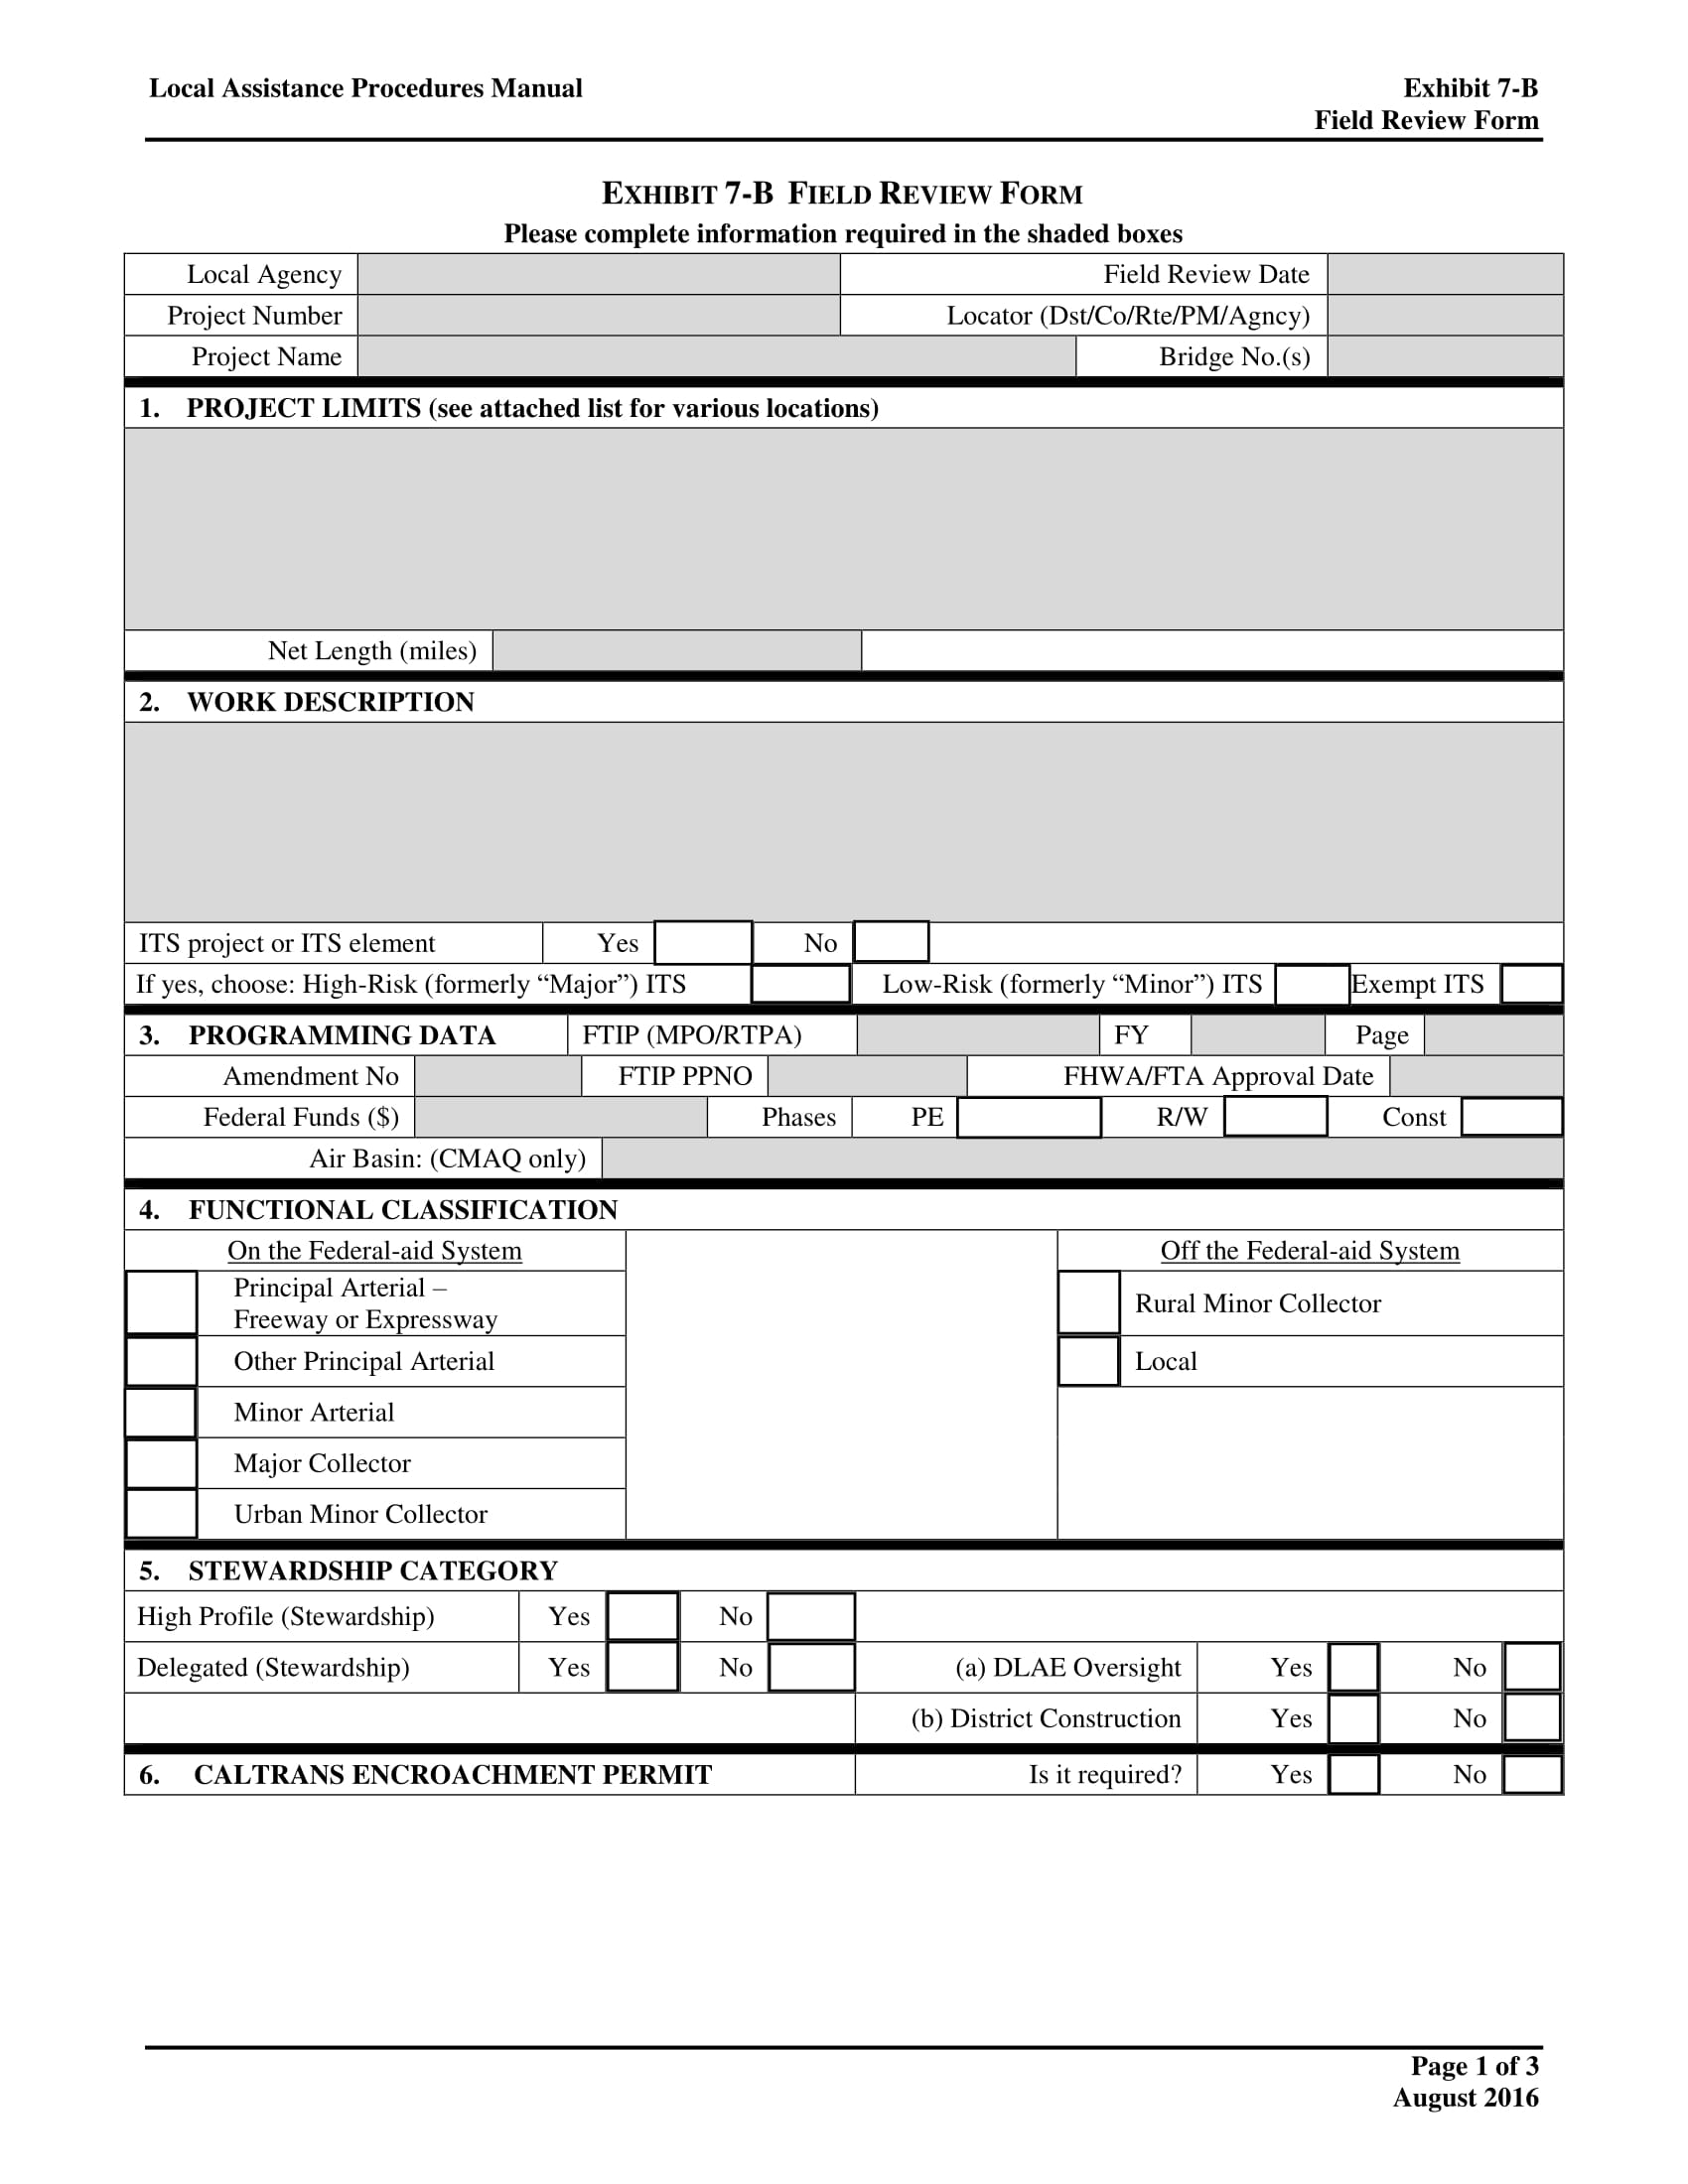 field review form 1